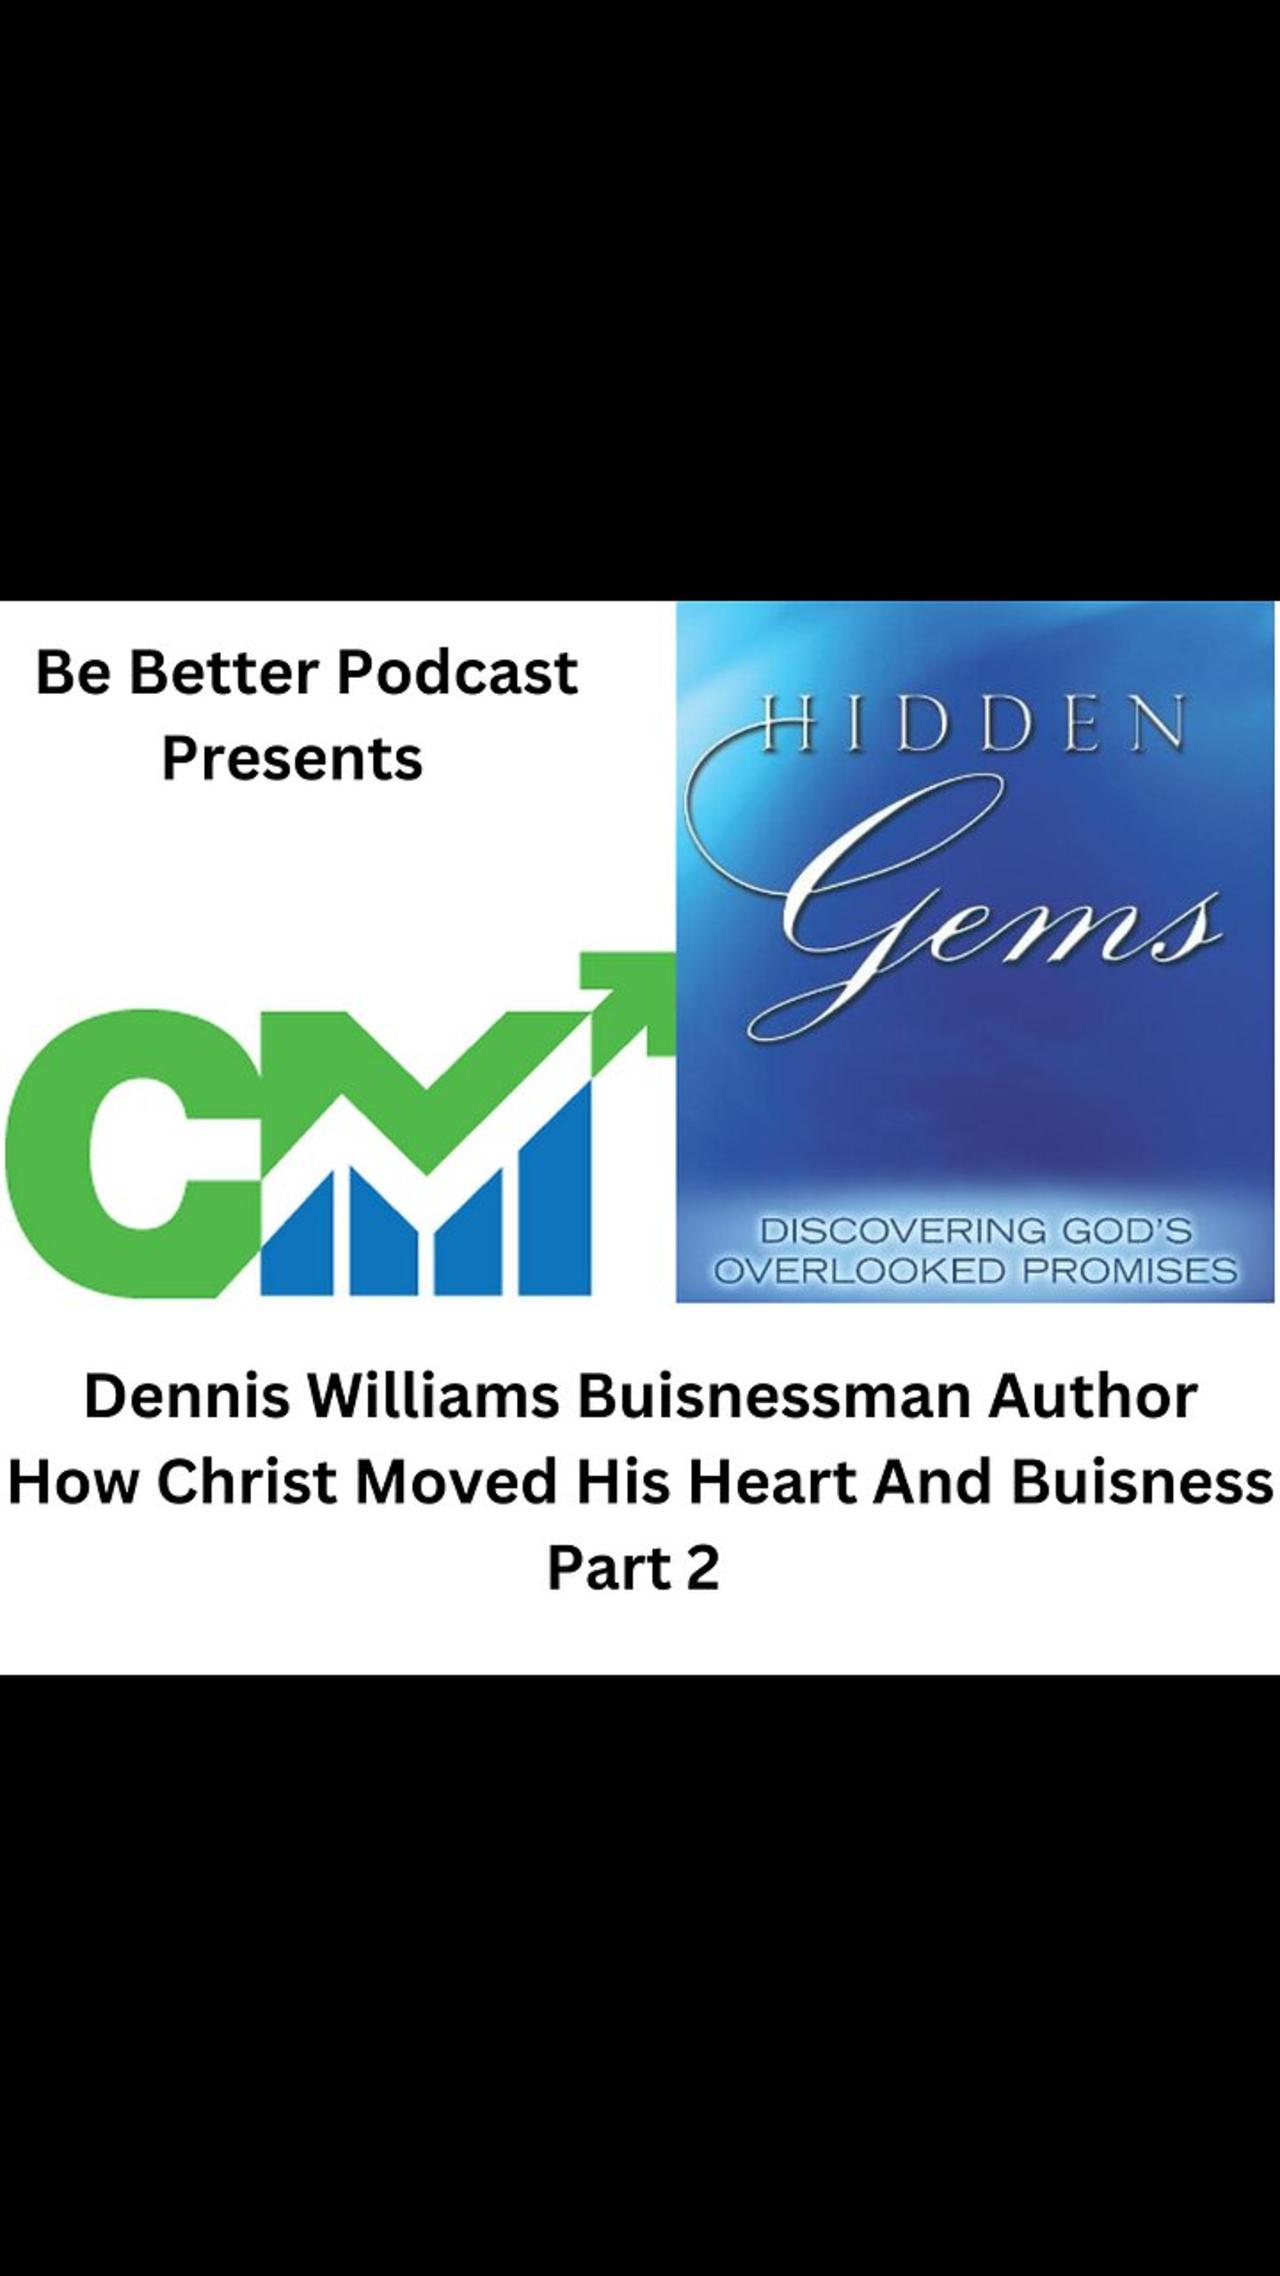 Dennis Williams Businessman Author How Christ Moved His Heart & Business Part 2